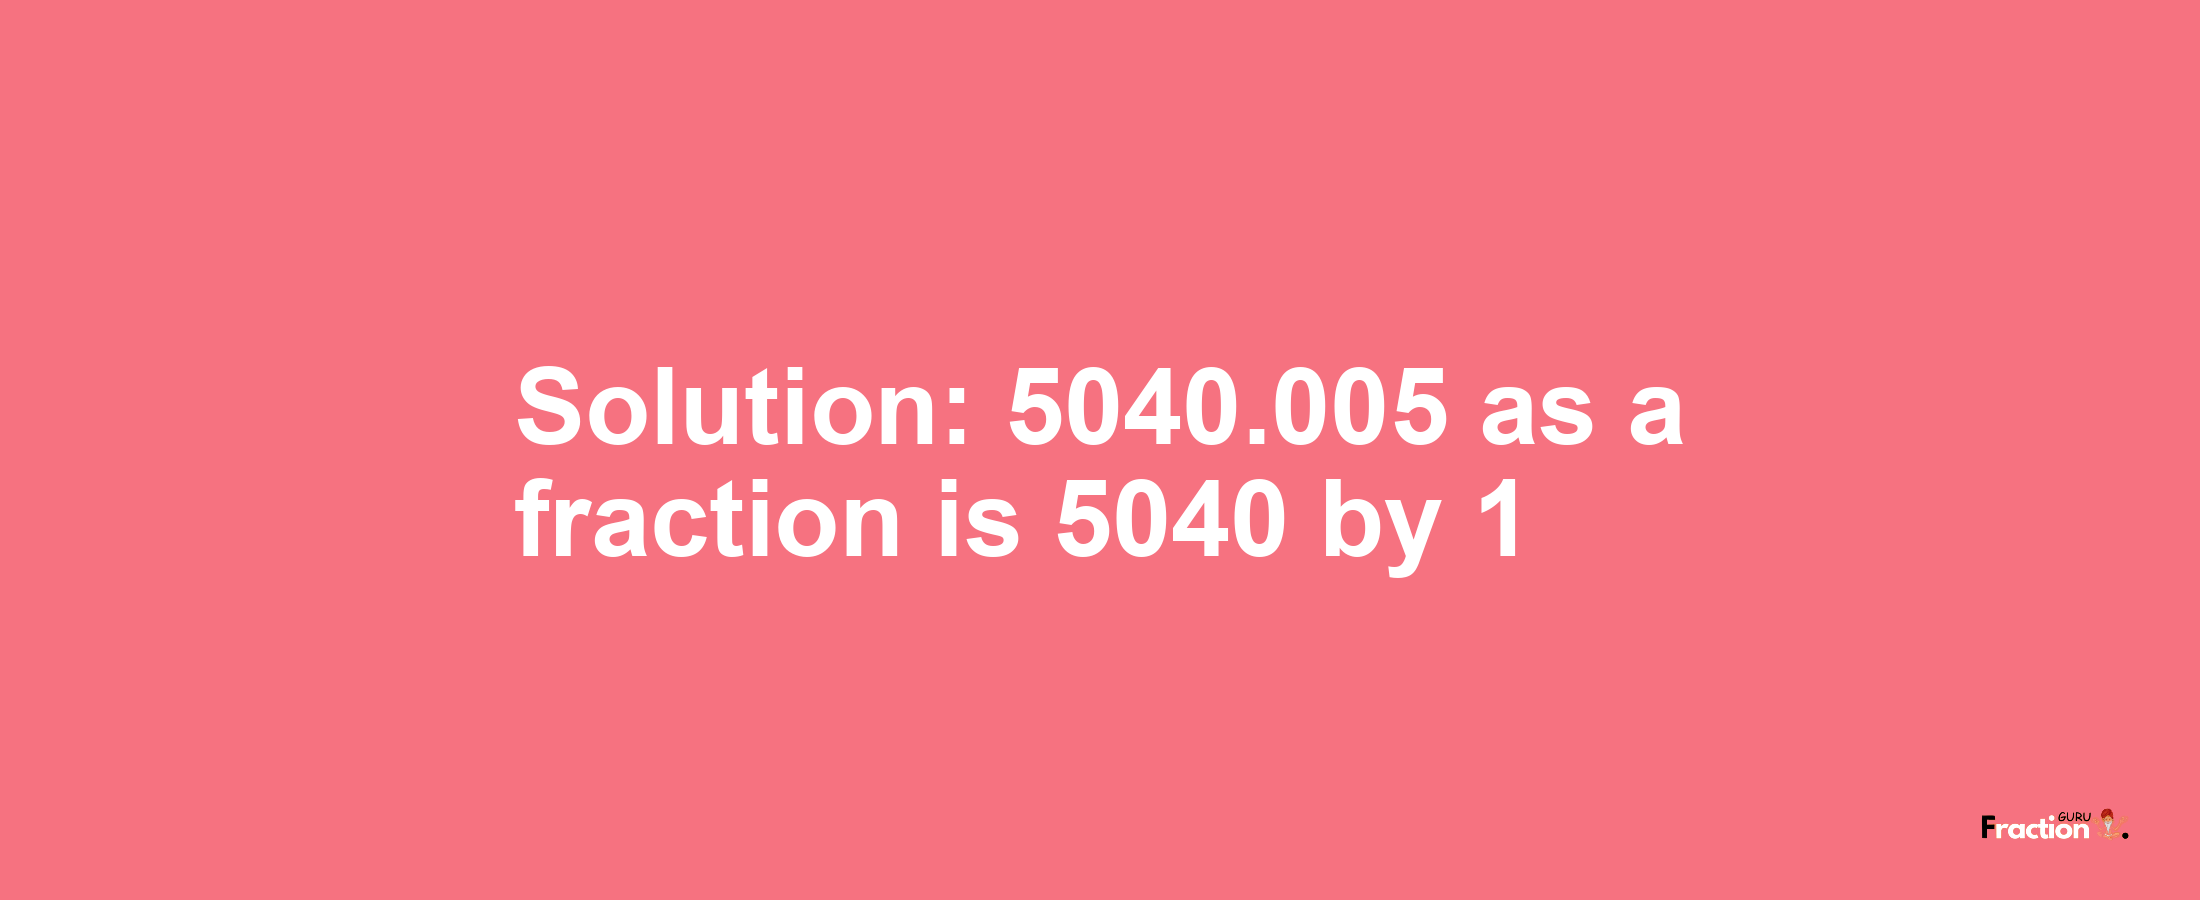 Solution:5040.005 as a fraction is 5040/1